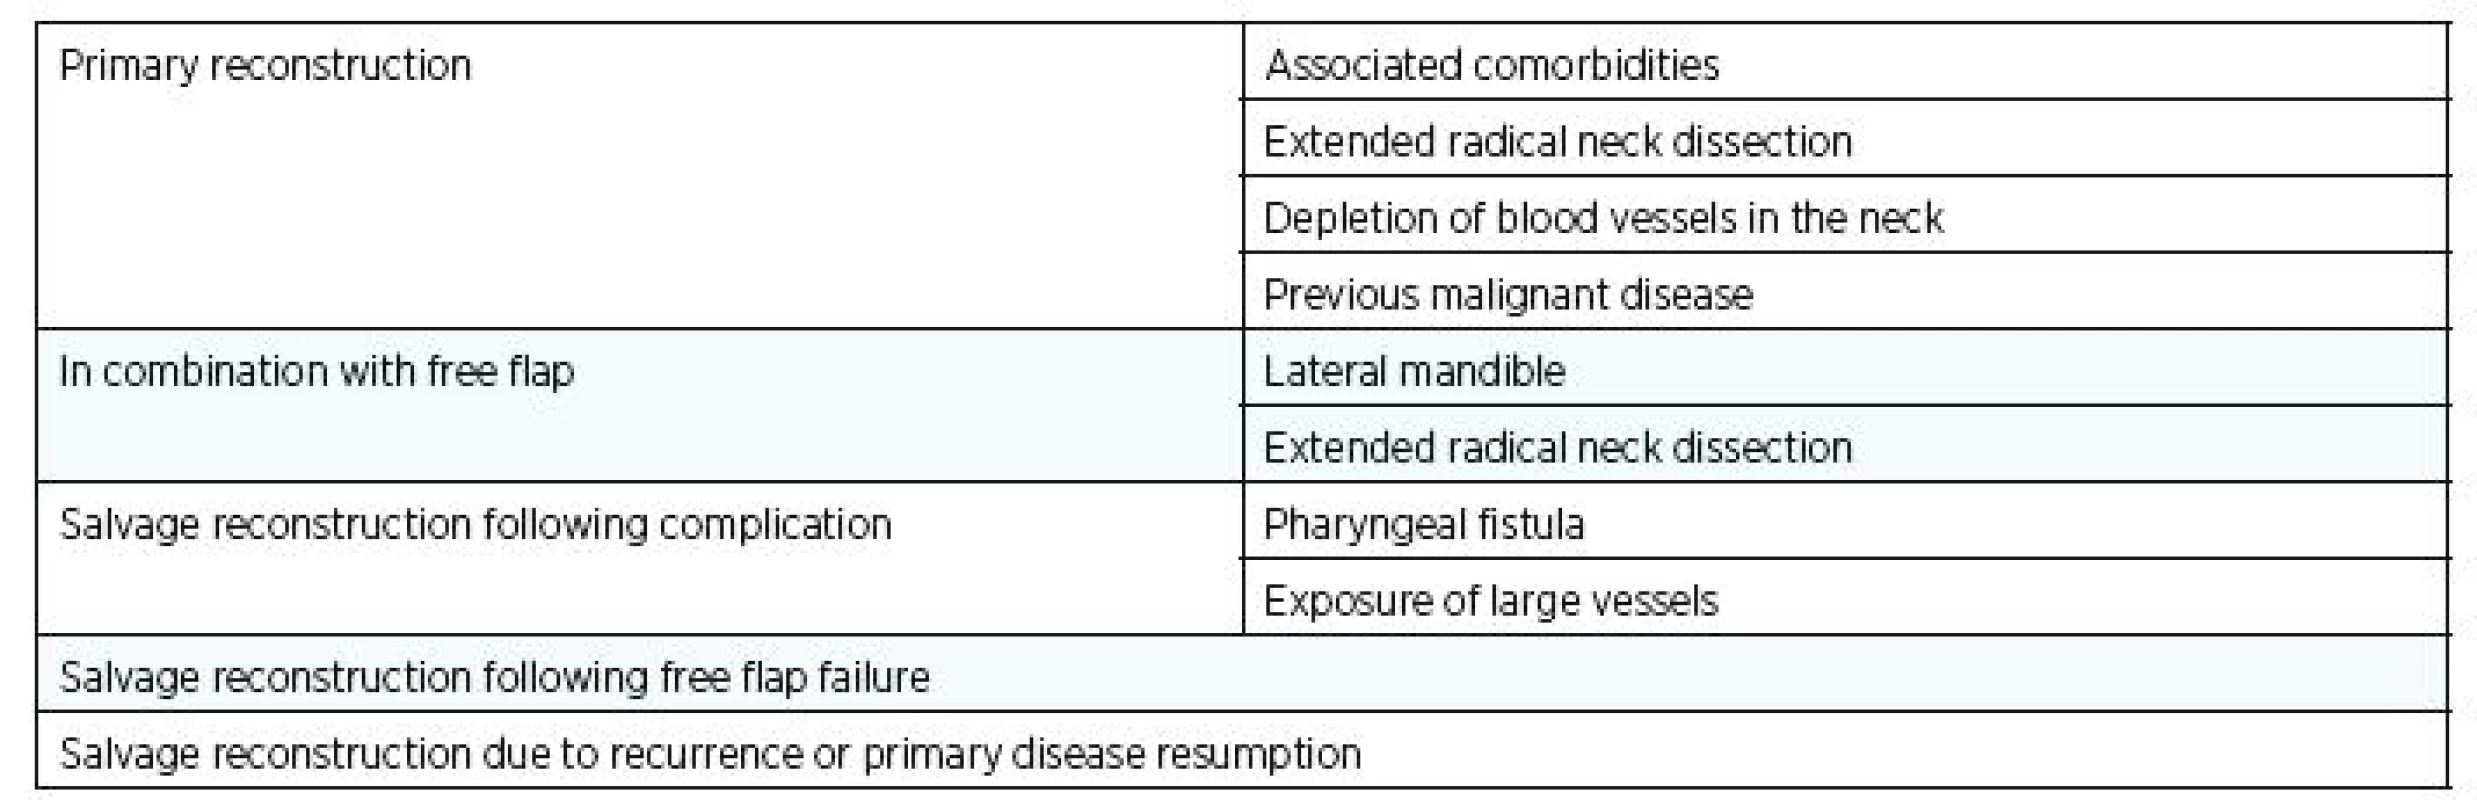 Summary of PPM flap indications for head and neck reconstructions